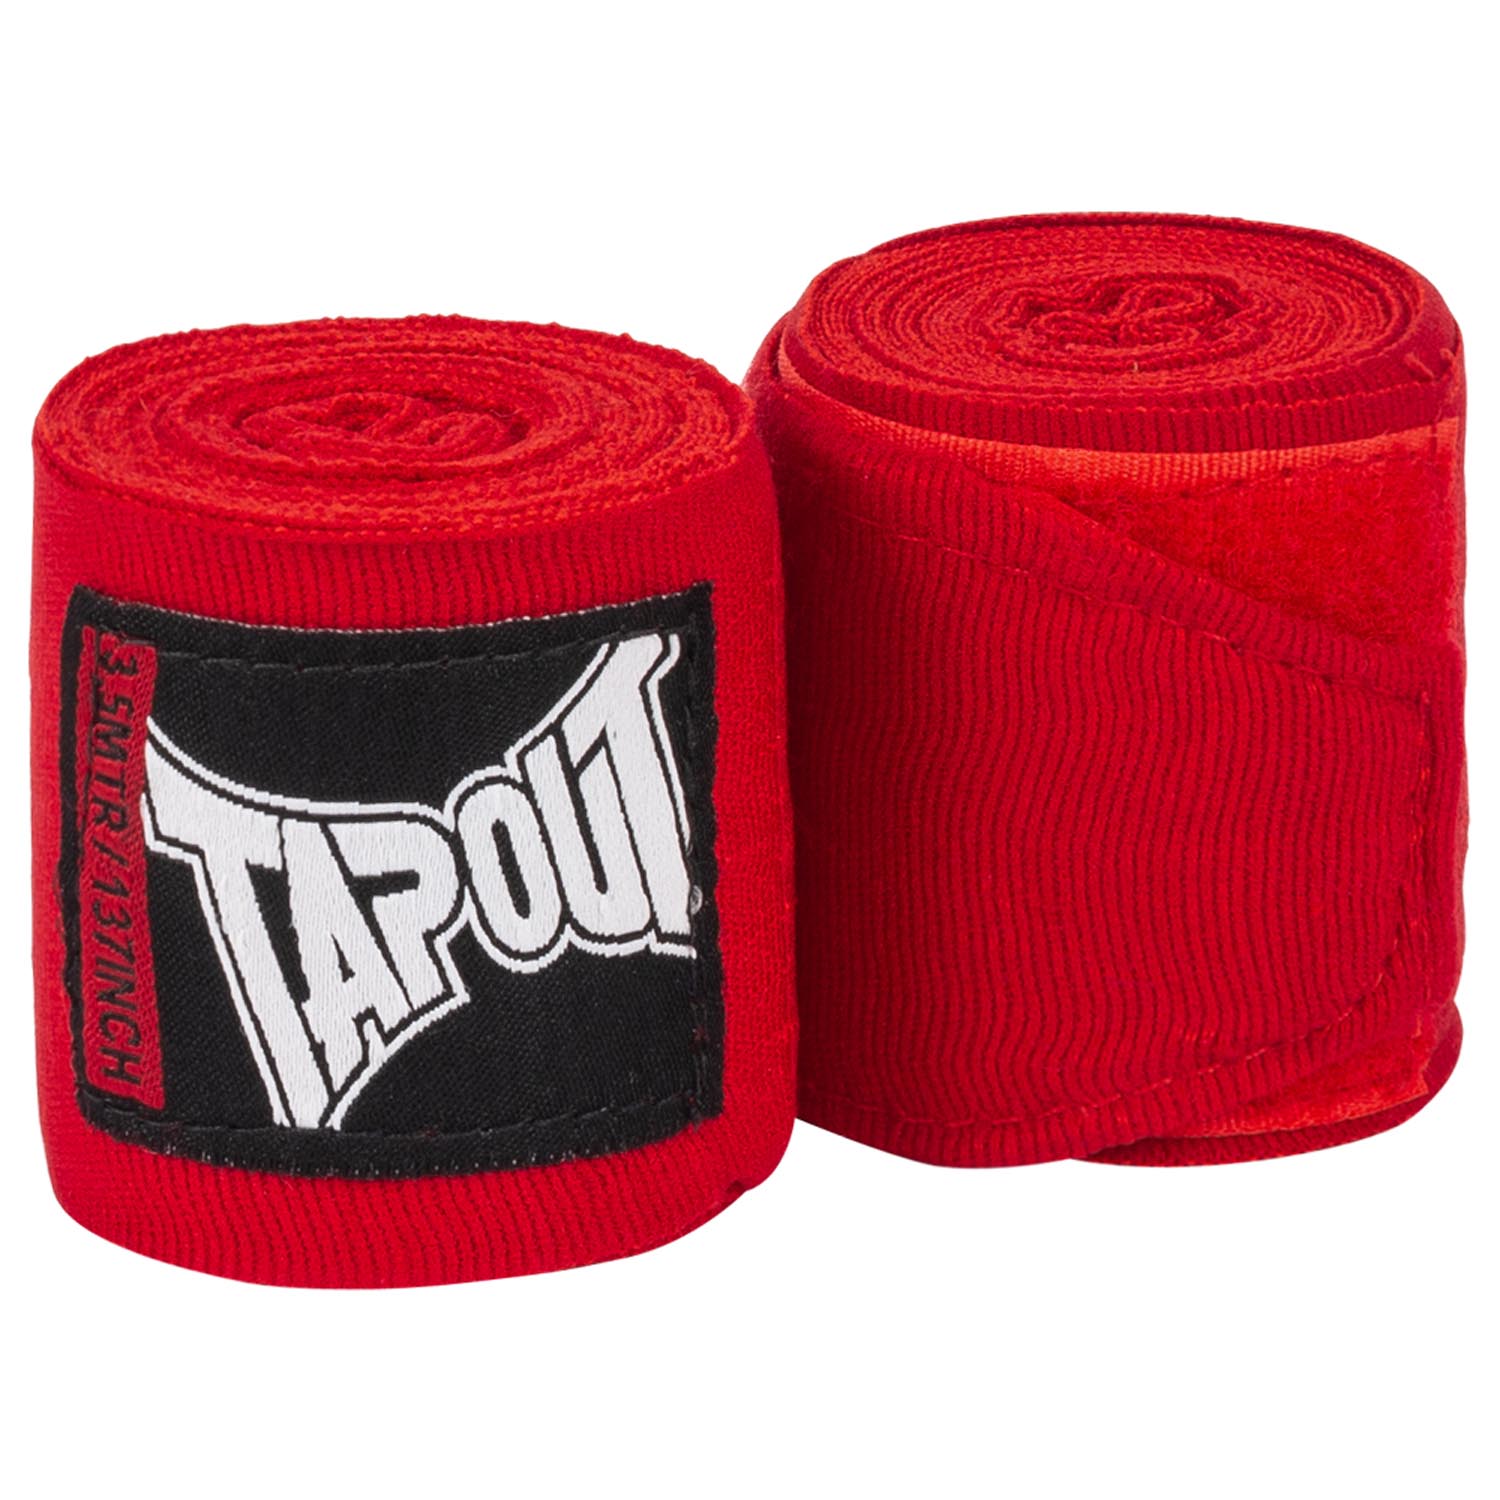 Tapout Handwraps, Sling, 3.5 m, red